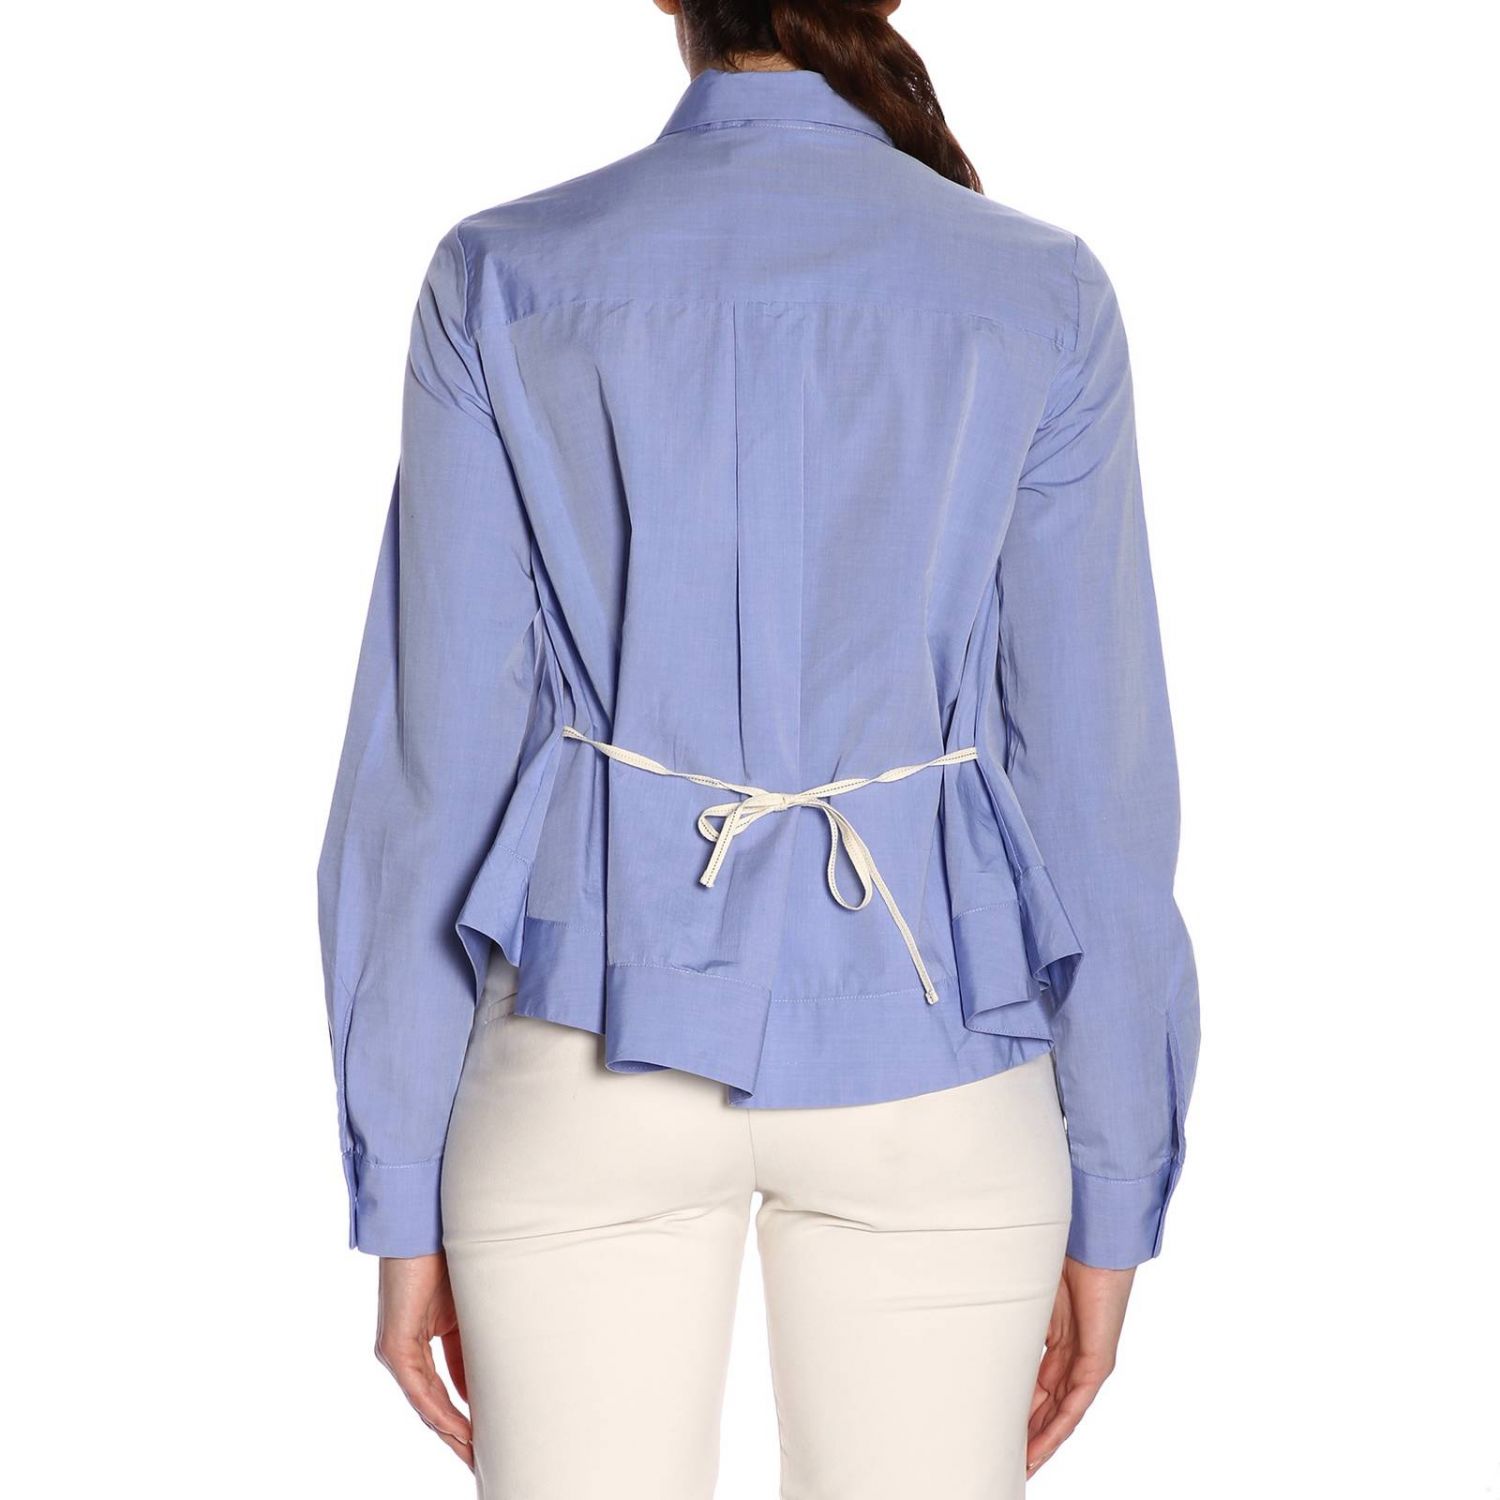 Semicouture Outlet: Shirt women - Gnawed Blue | Shirt Semicouture